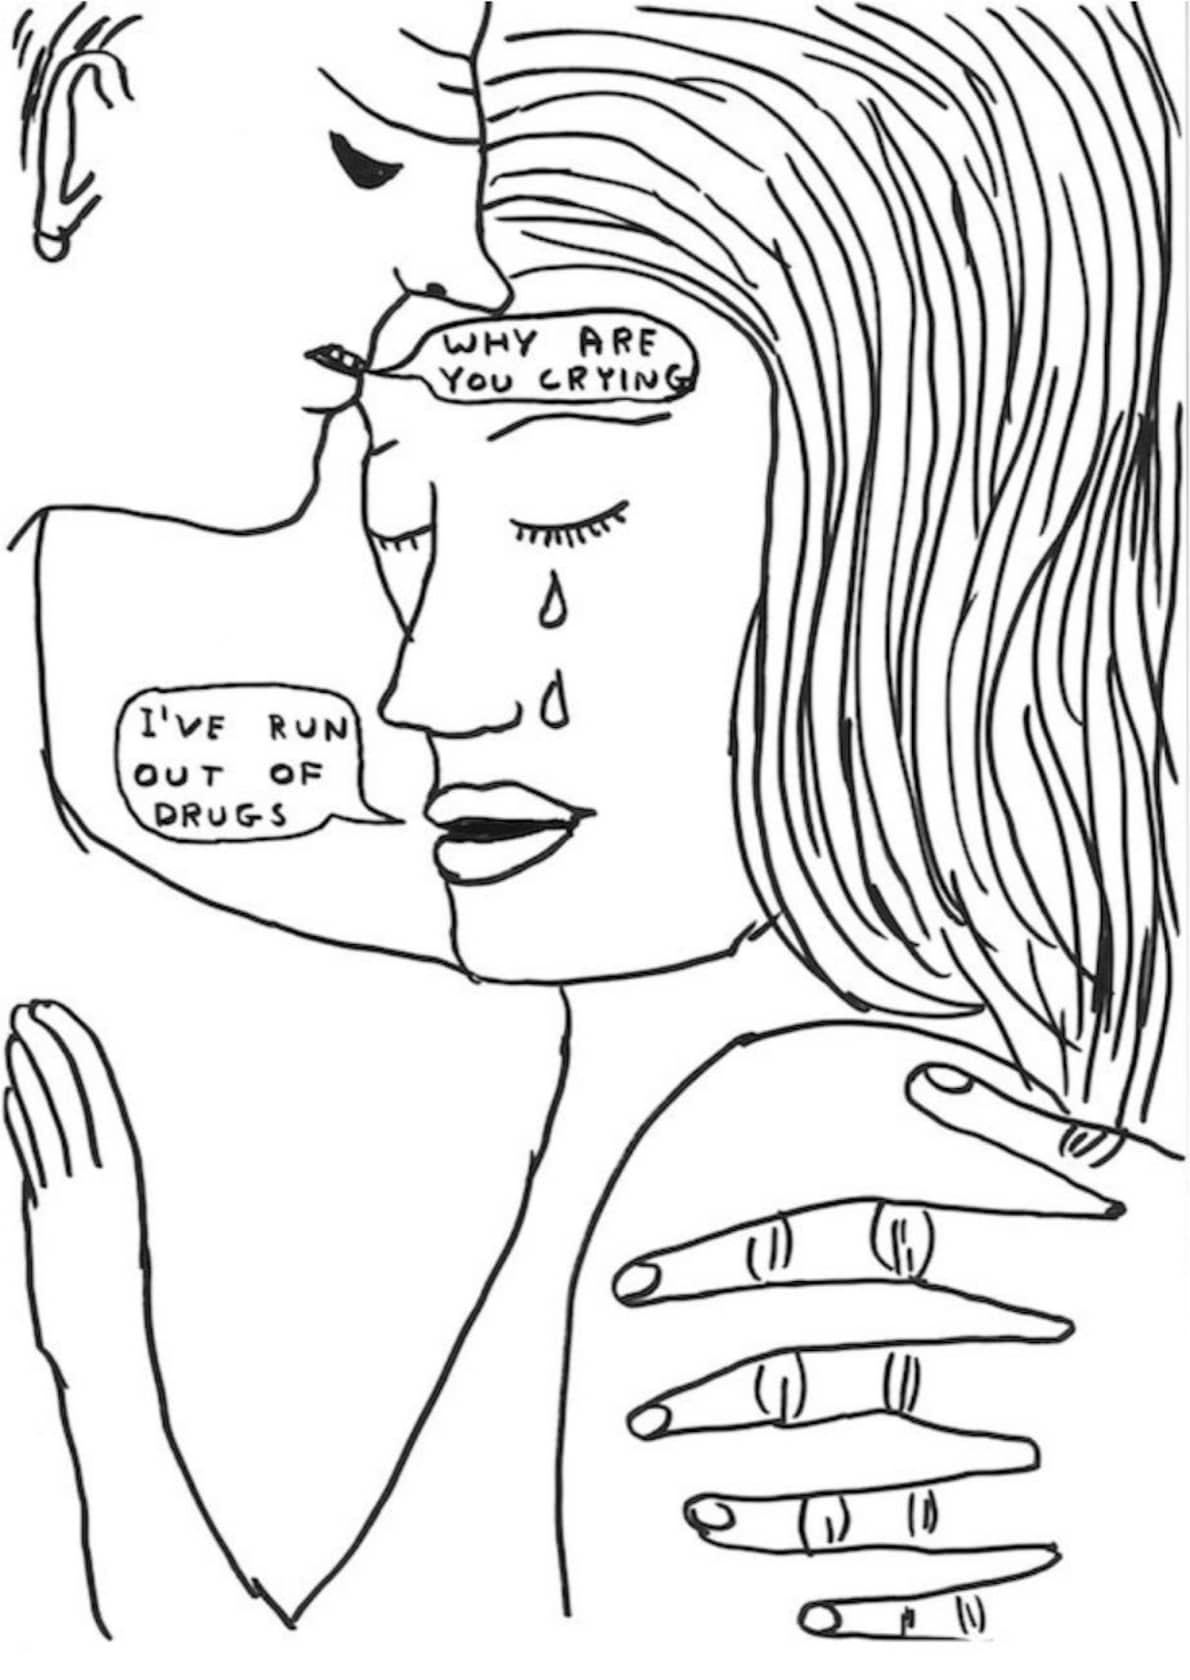 David Shrigley, Untitled (Why are you crying), 2018